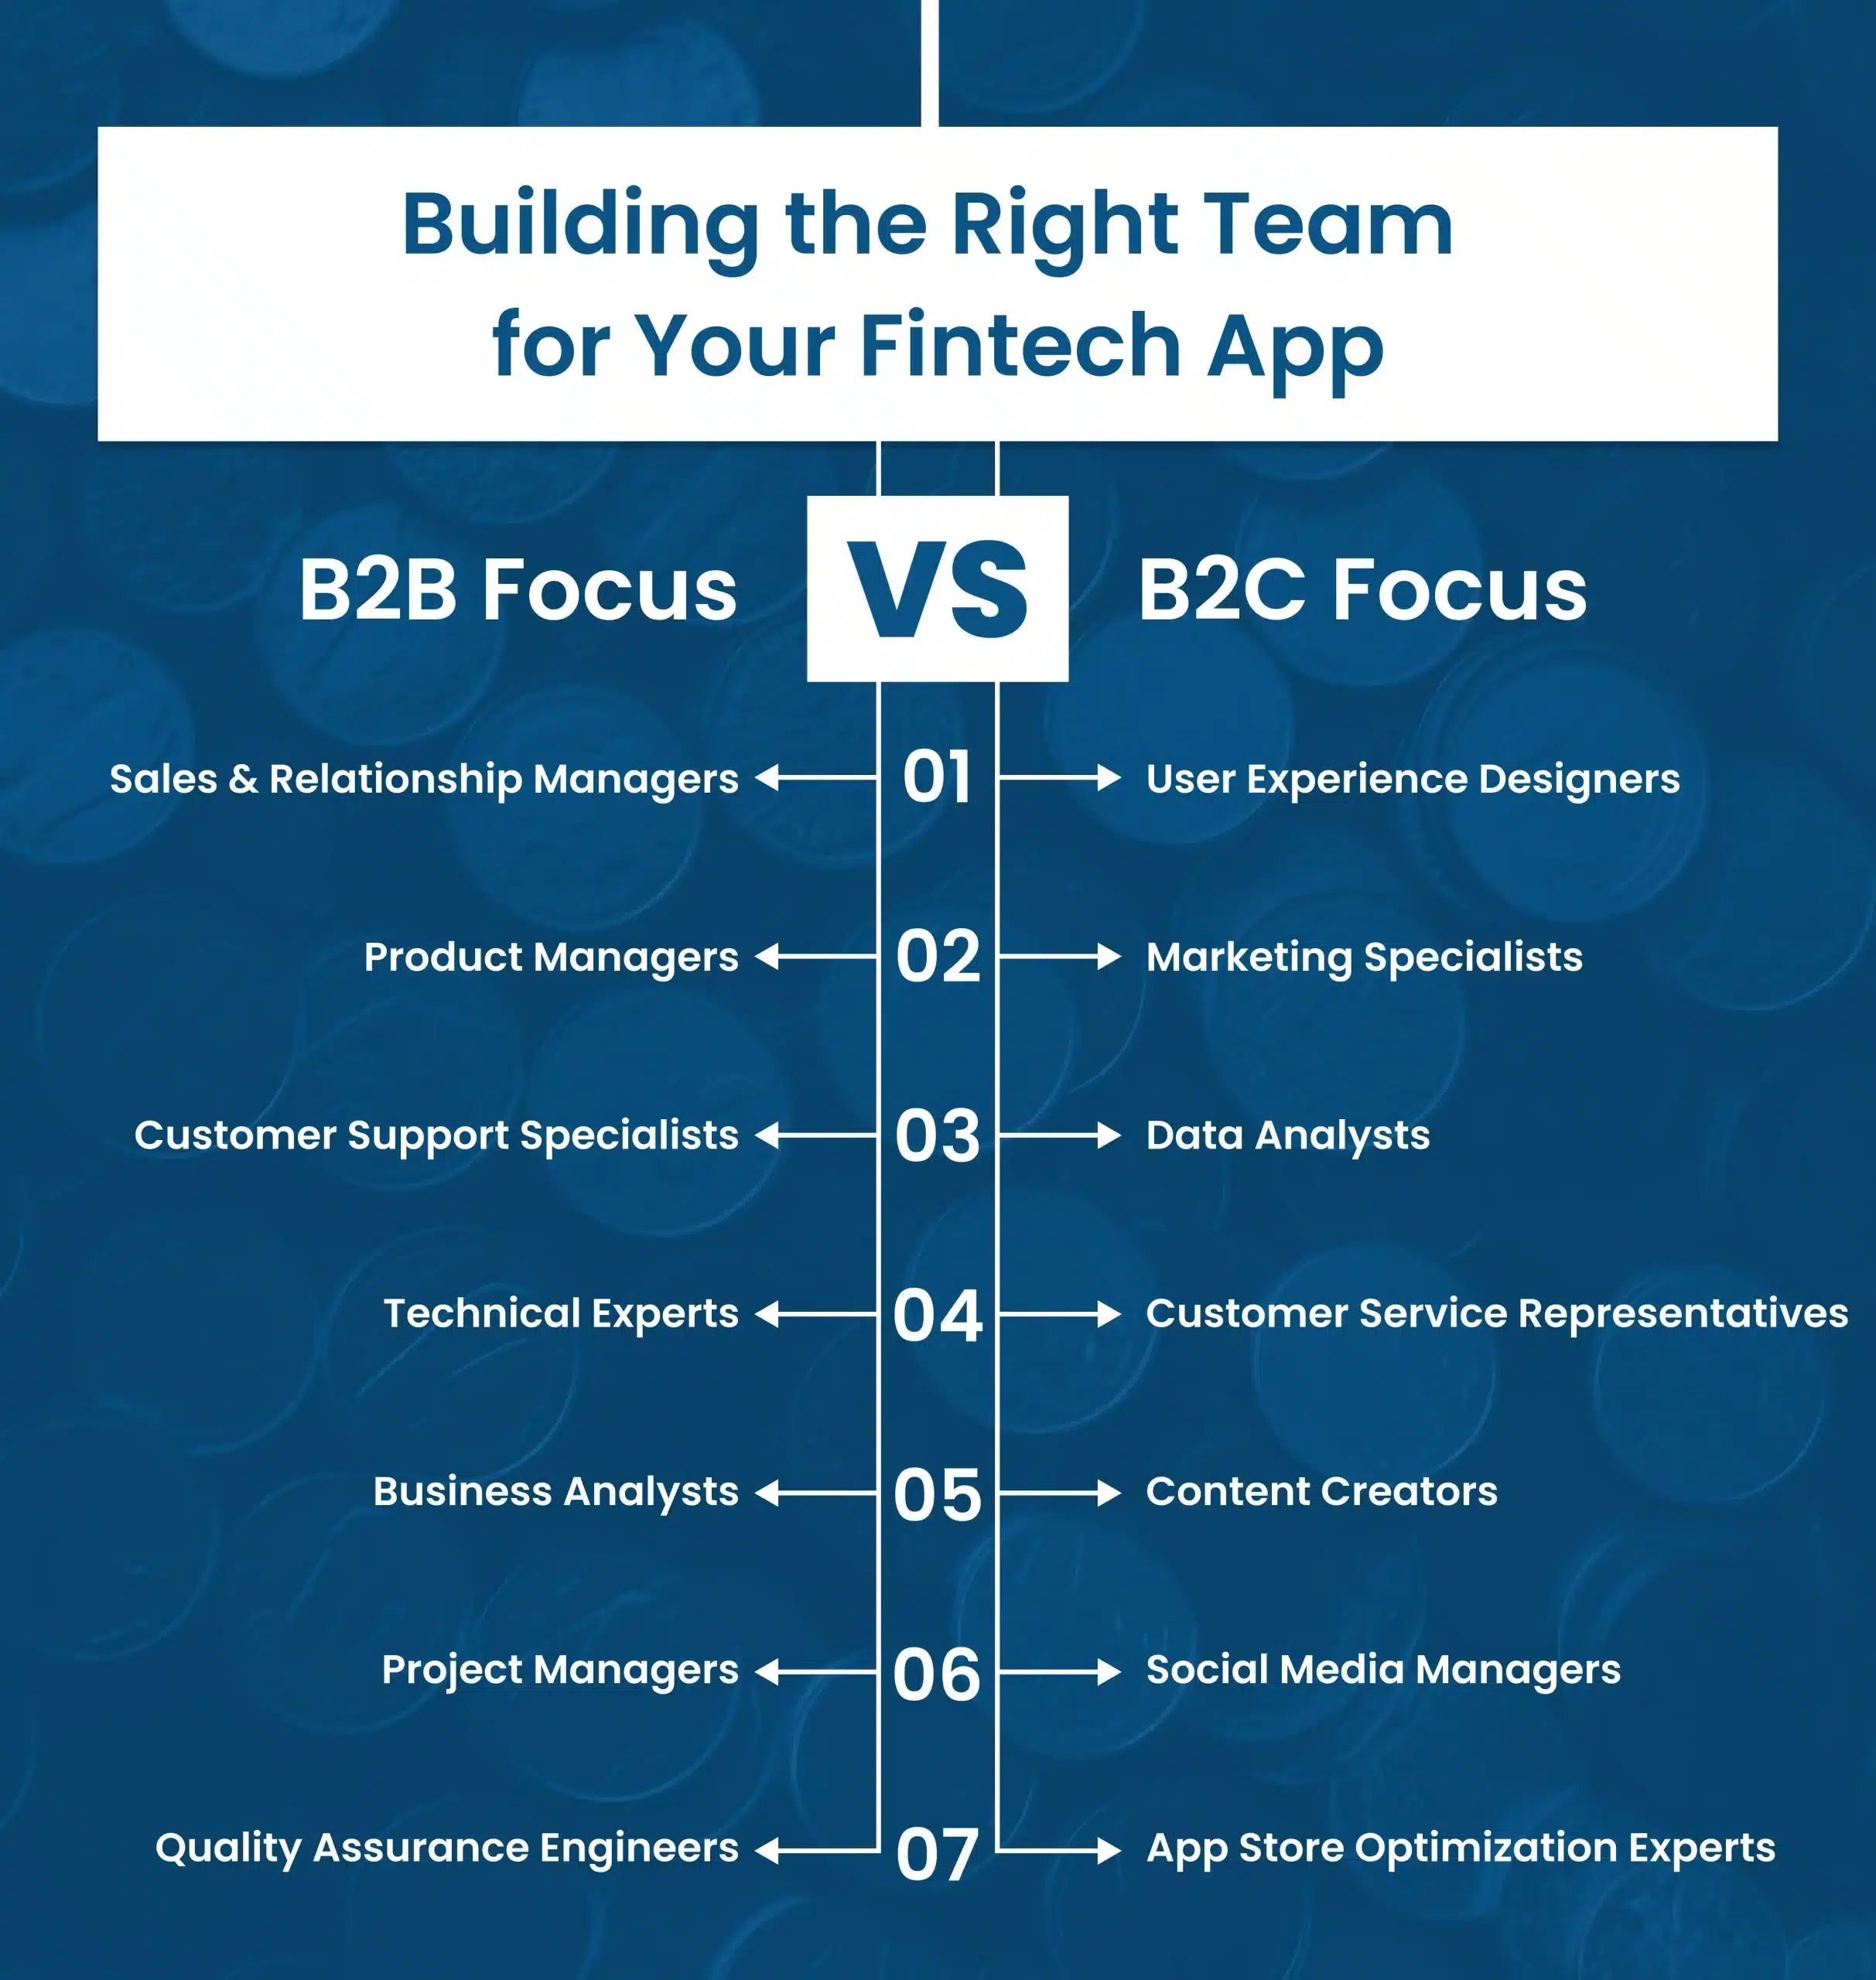 Building the Right Team for Your Fintech App (B2B vs. B2C Focus)